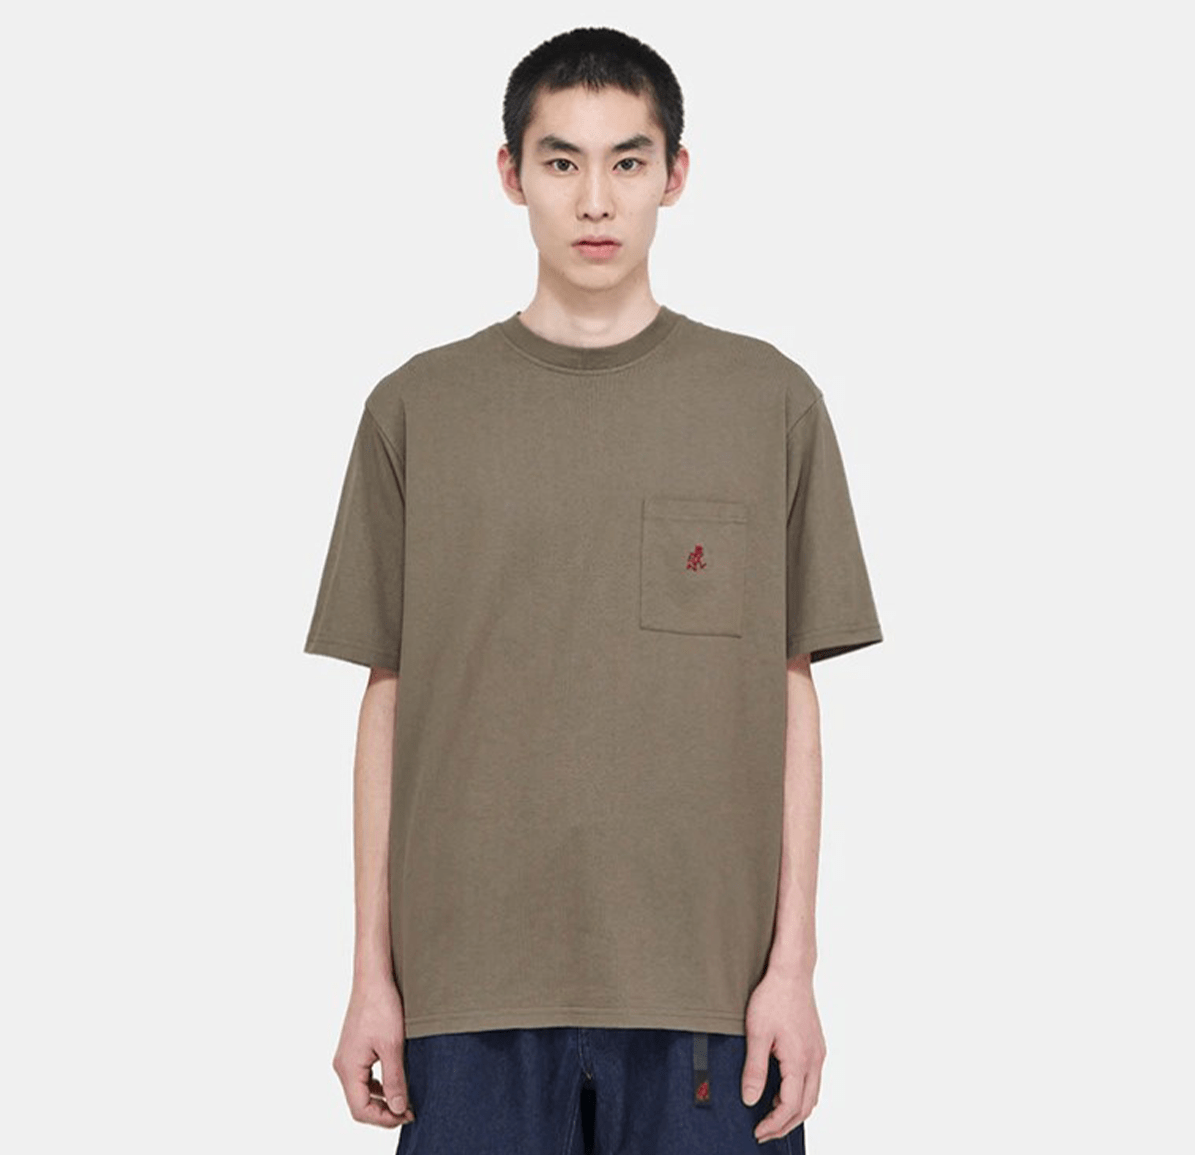 Gramicci Short Sleeve One Point Tee Shirt - Coyote - Gramicci - State Of Play